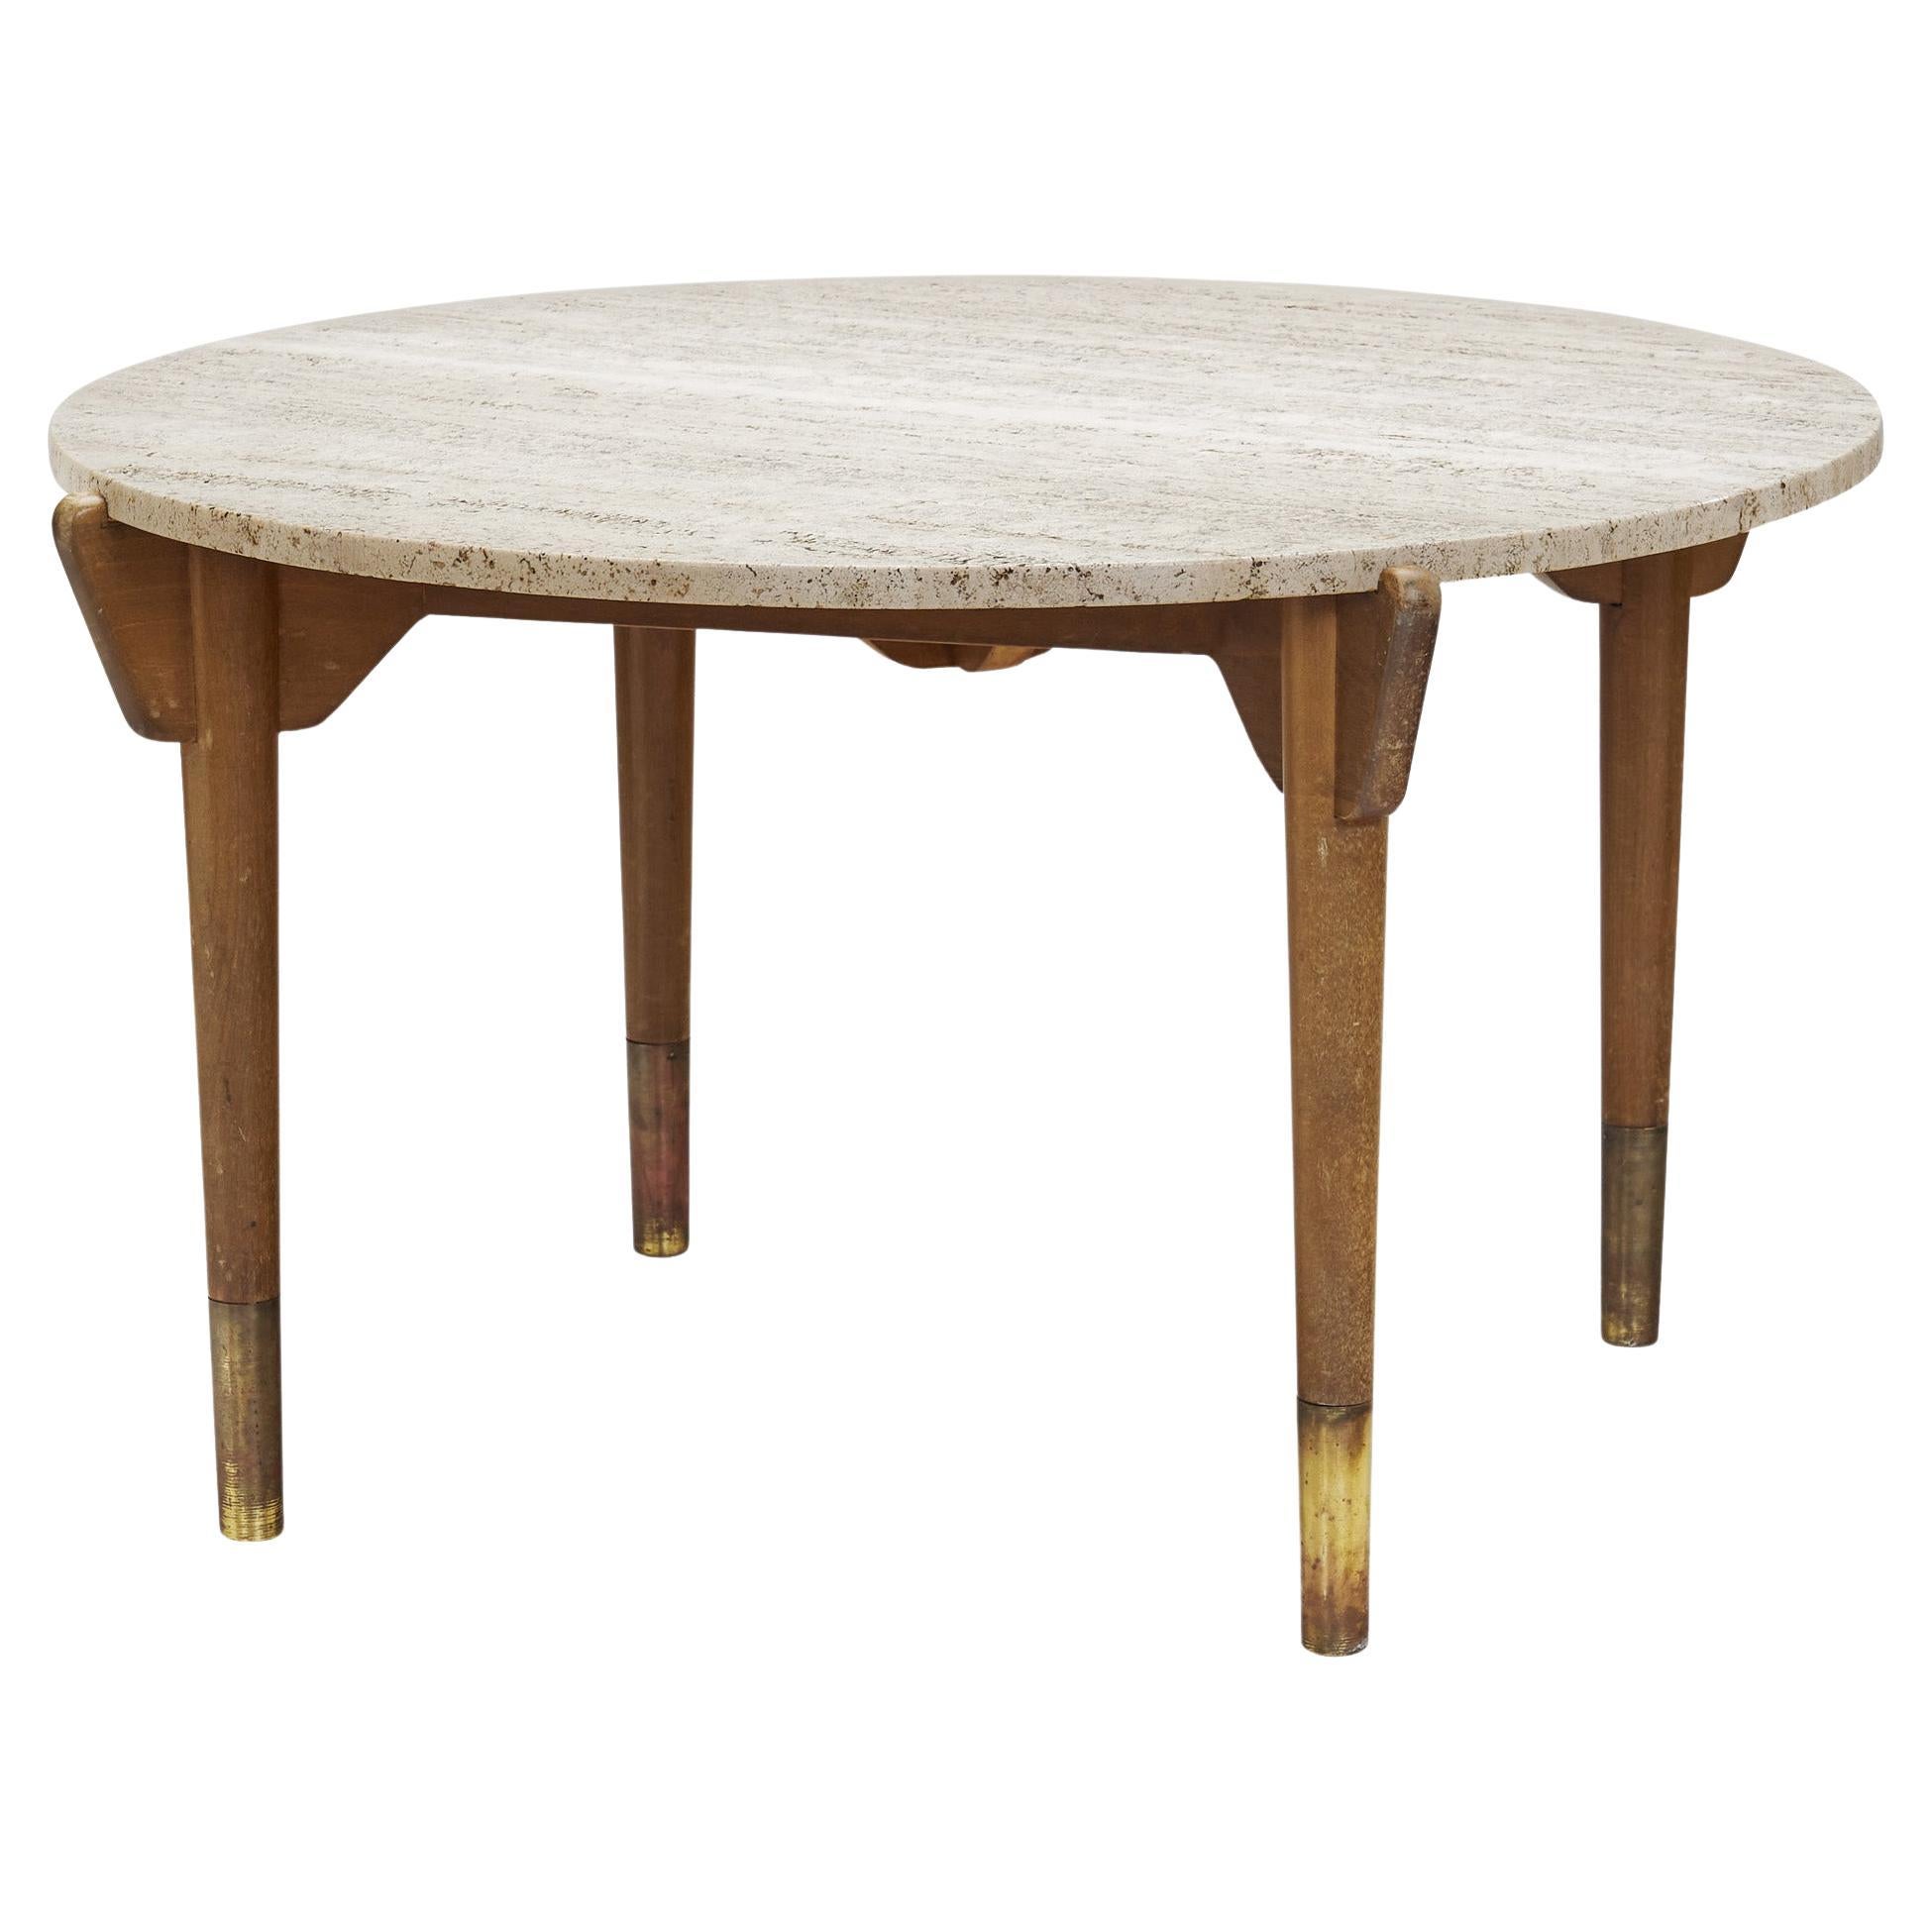 Swedish Modern Stained Beech Coffee Table with Travertine Top, Sweden 1940s For Sale